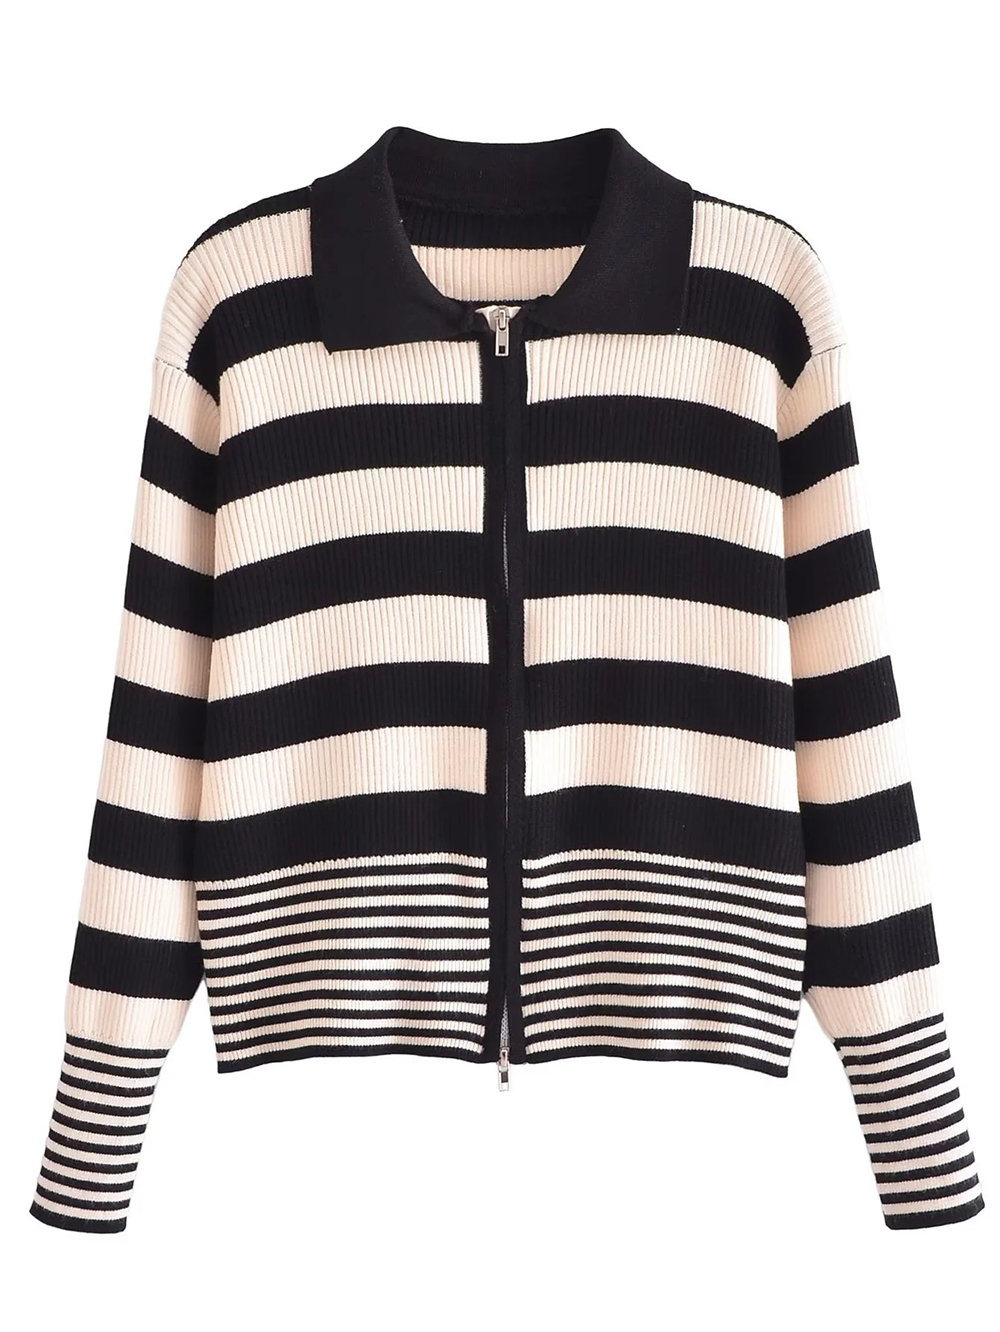 Fashion Black And White Black And White Striped Cardigan,Sweater